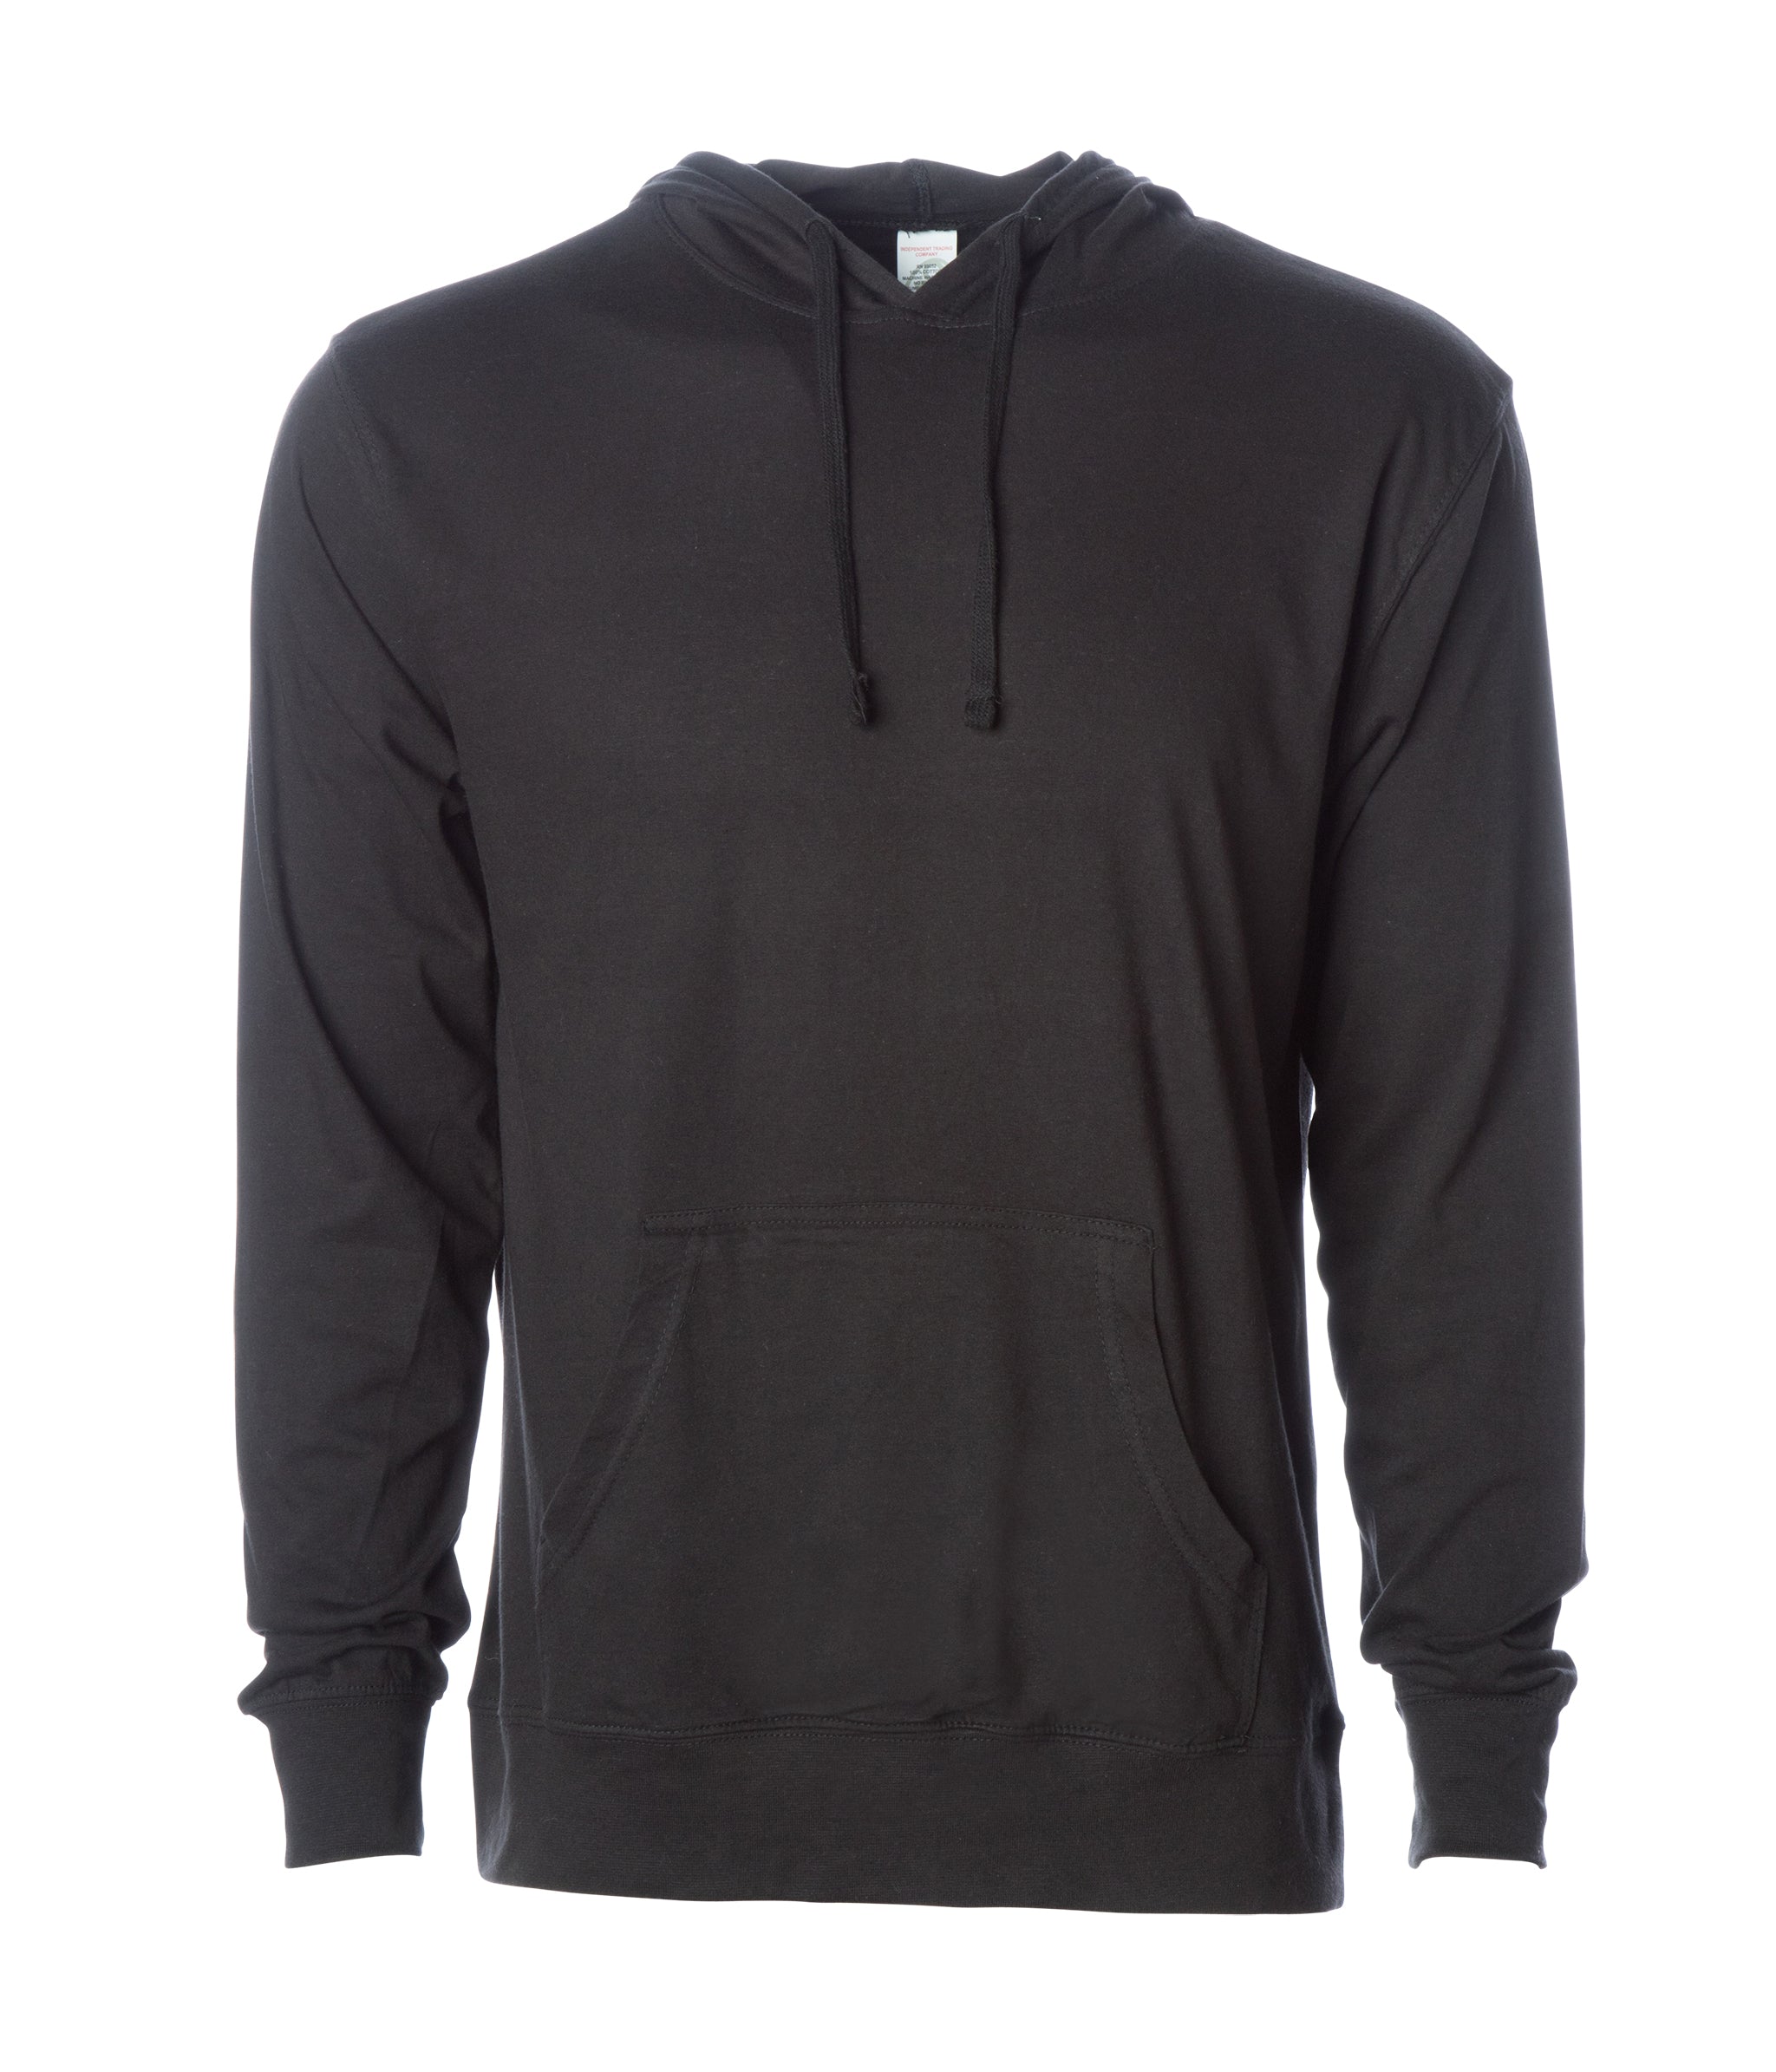 Independent Trading Co. SS150J Lightweight Hooded Pullover T-Shirt, Black